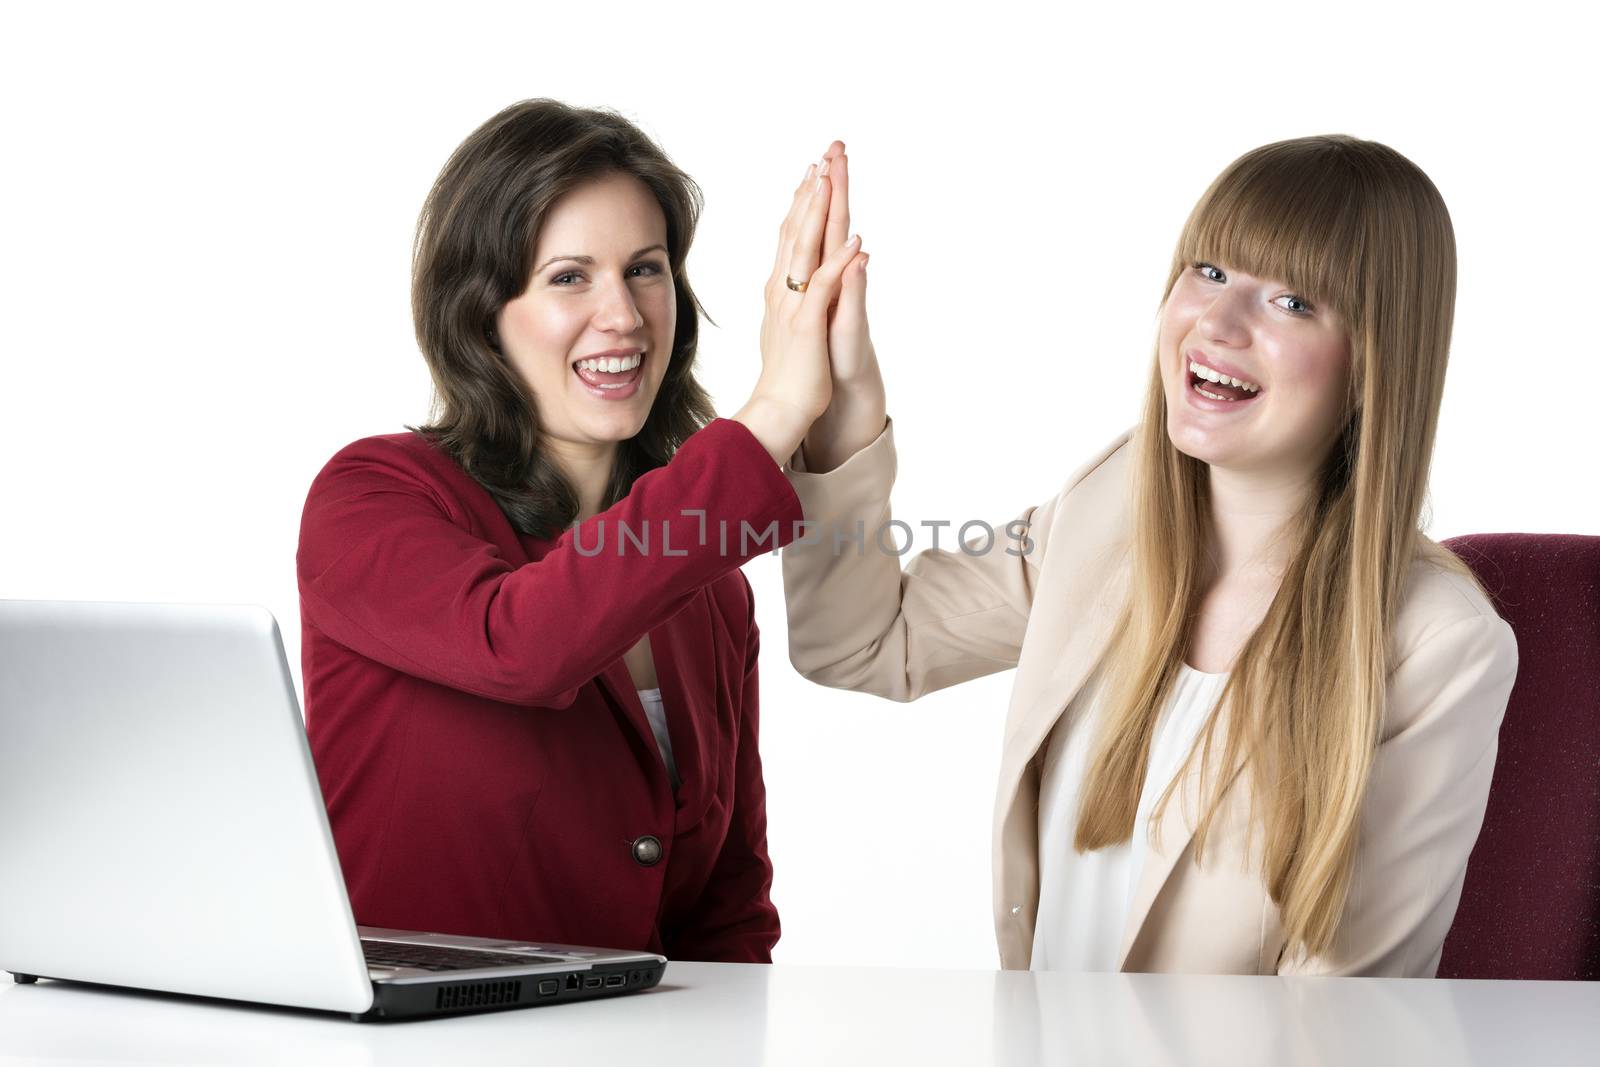 Two happy women blonde and brunette, sitting together in front of a laptop